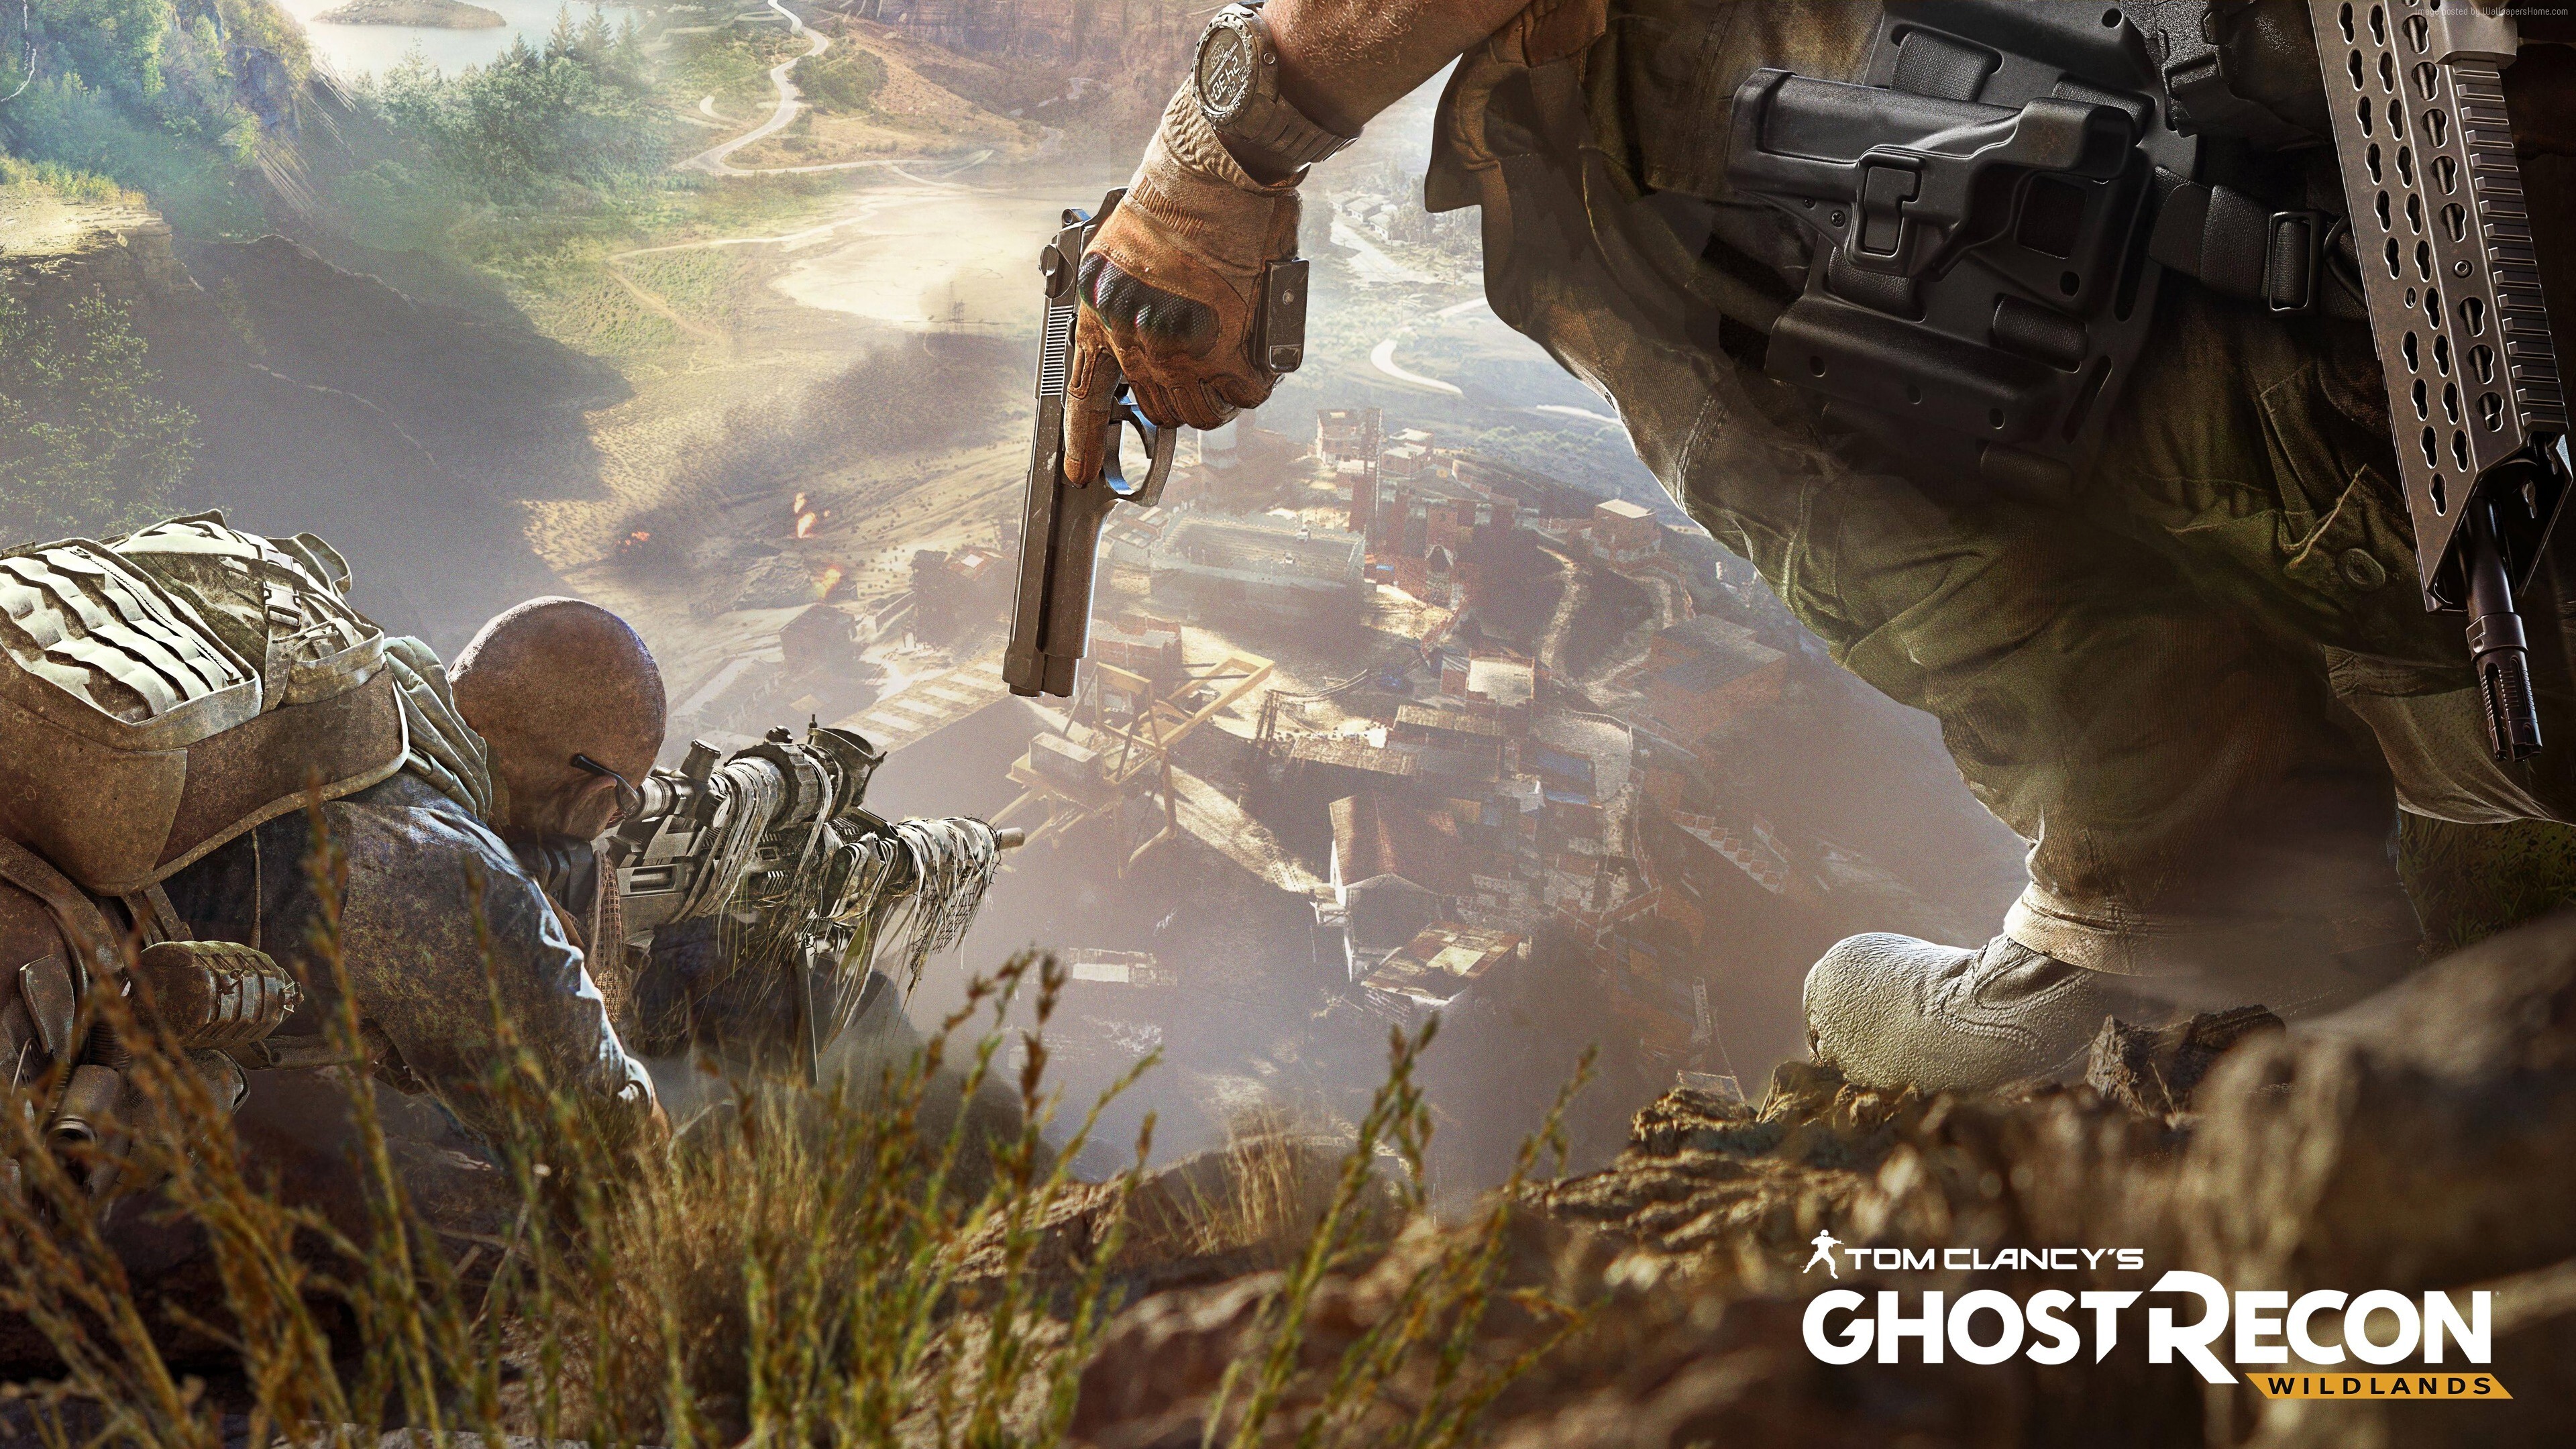 Ghost Recon: Wildlands: The first game in the Tom Clancy's series to feature an open-world environment. 3840x2160 4K Background.